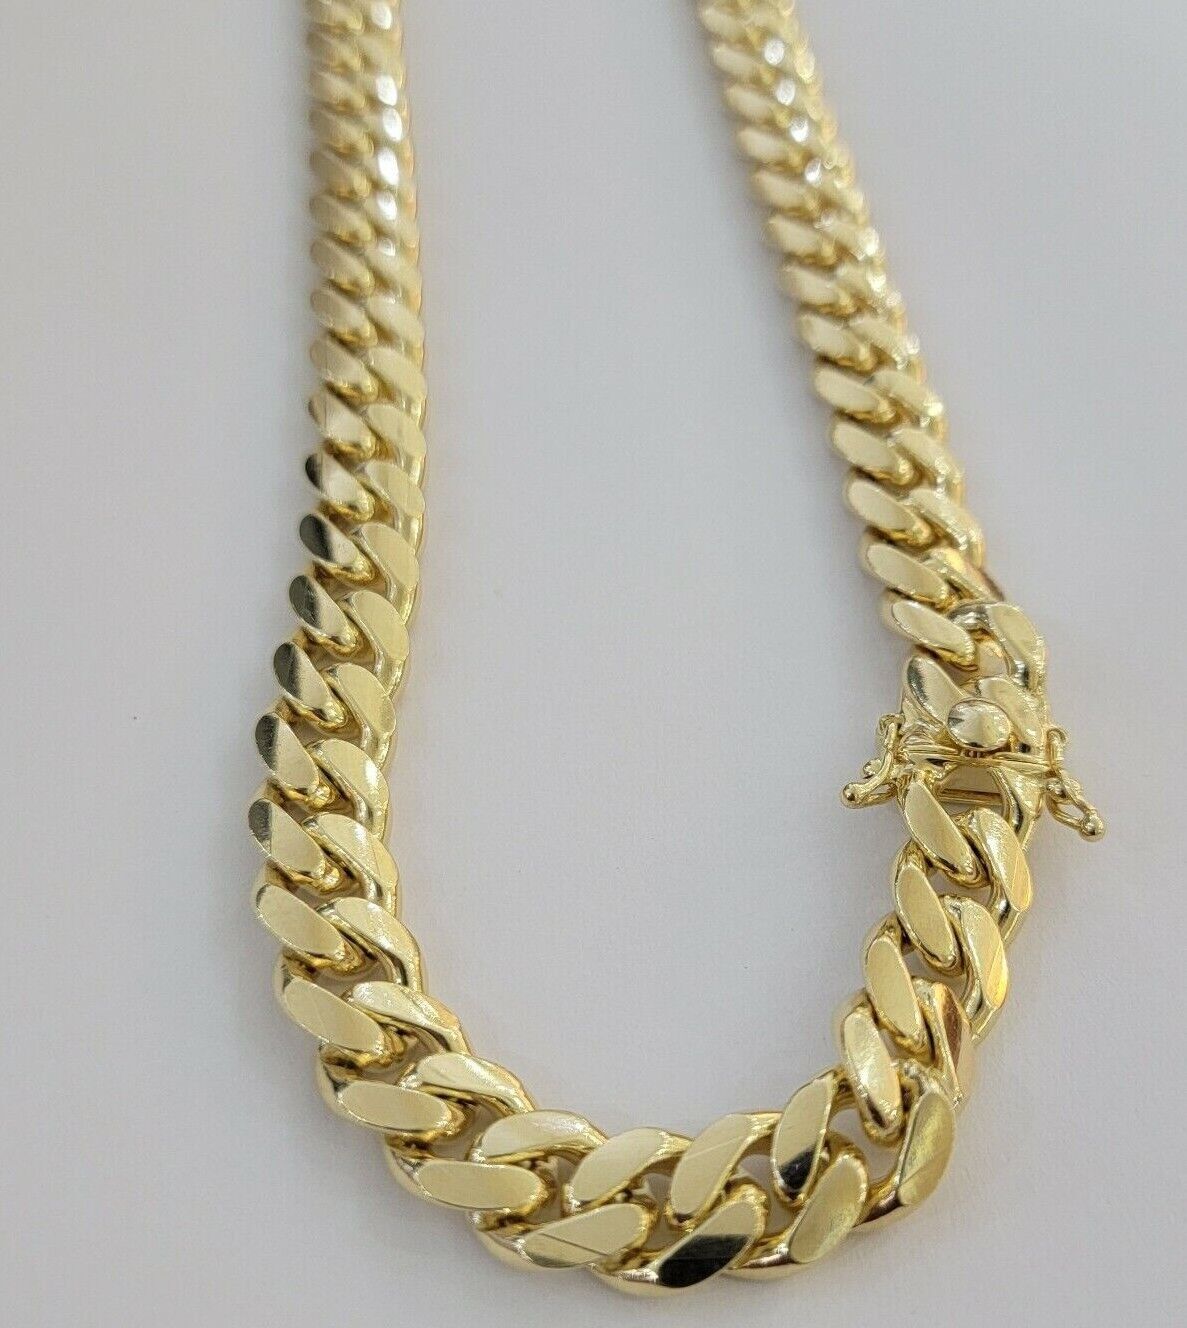 15mm Miami Cuban Link Chain Necklace 10k Yellow Gold 22-30 Inch Mens SOLID 10kt